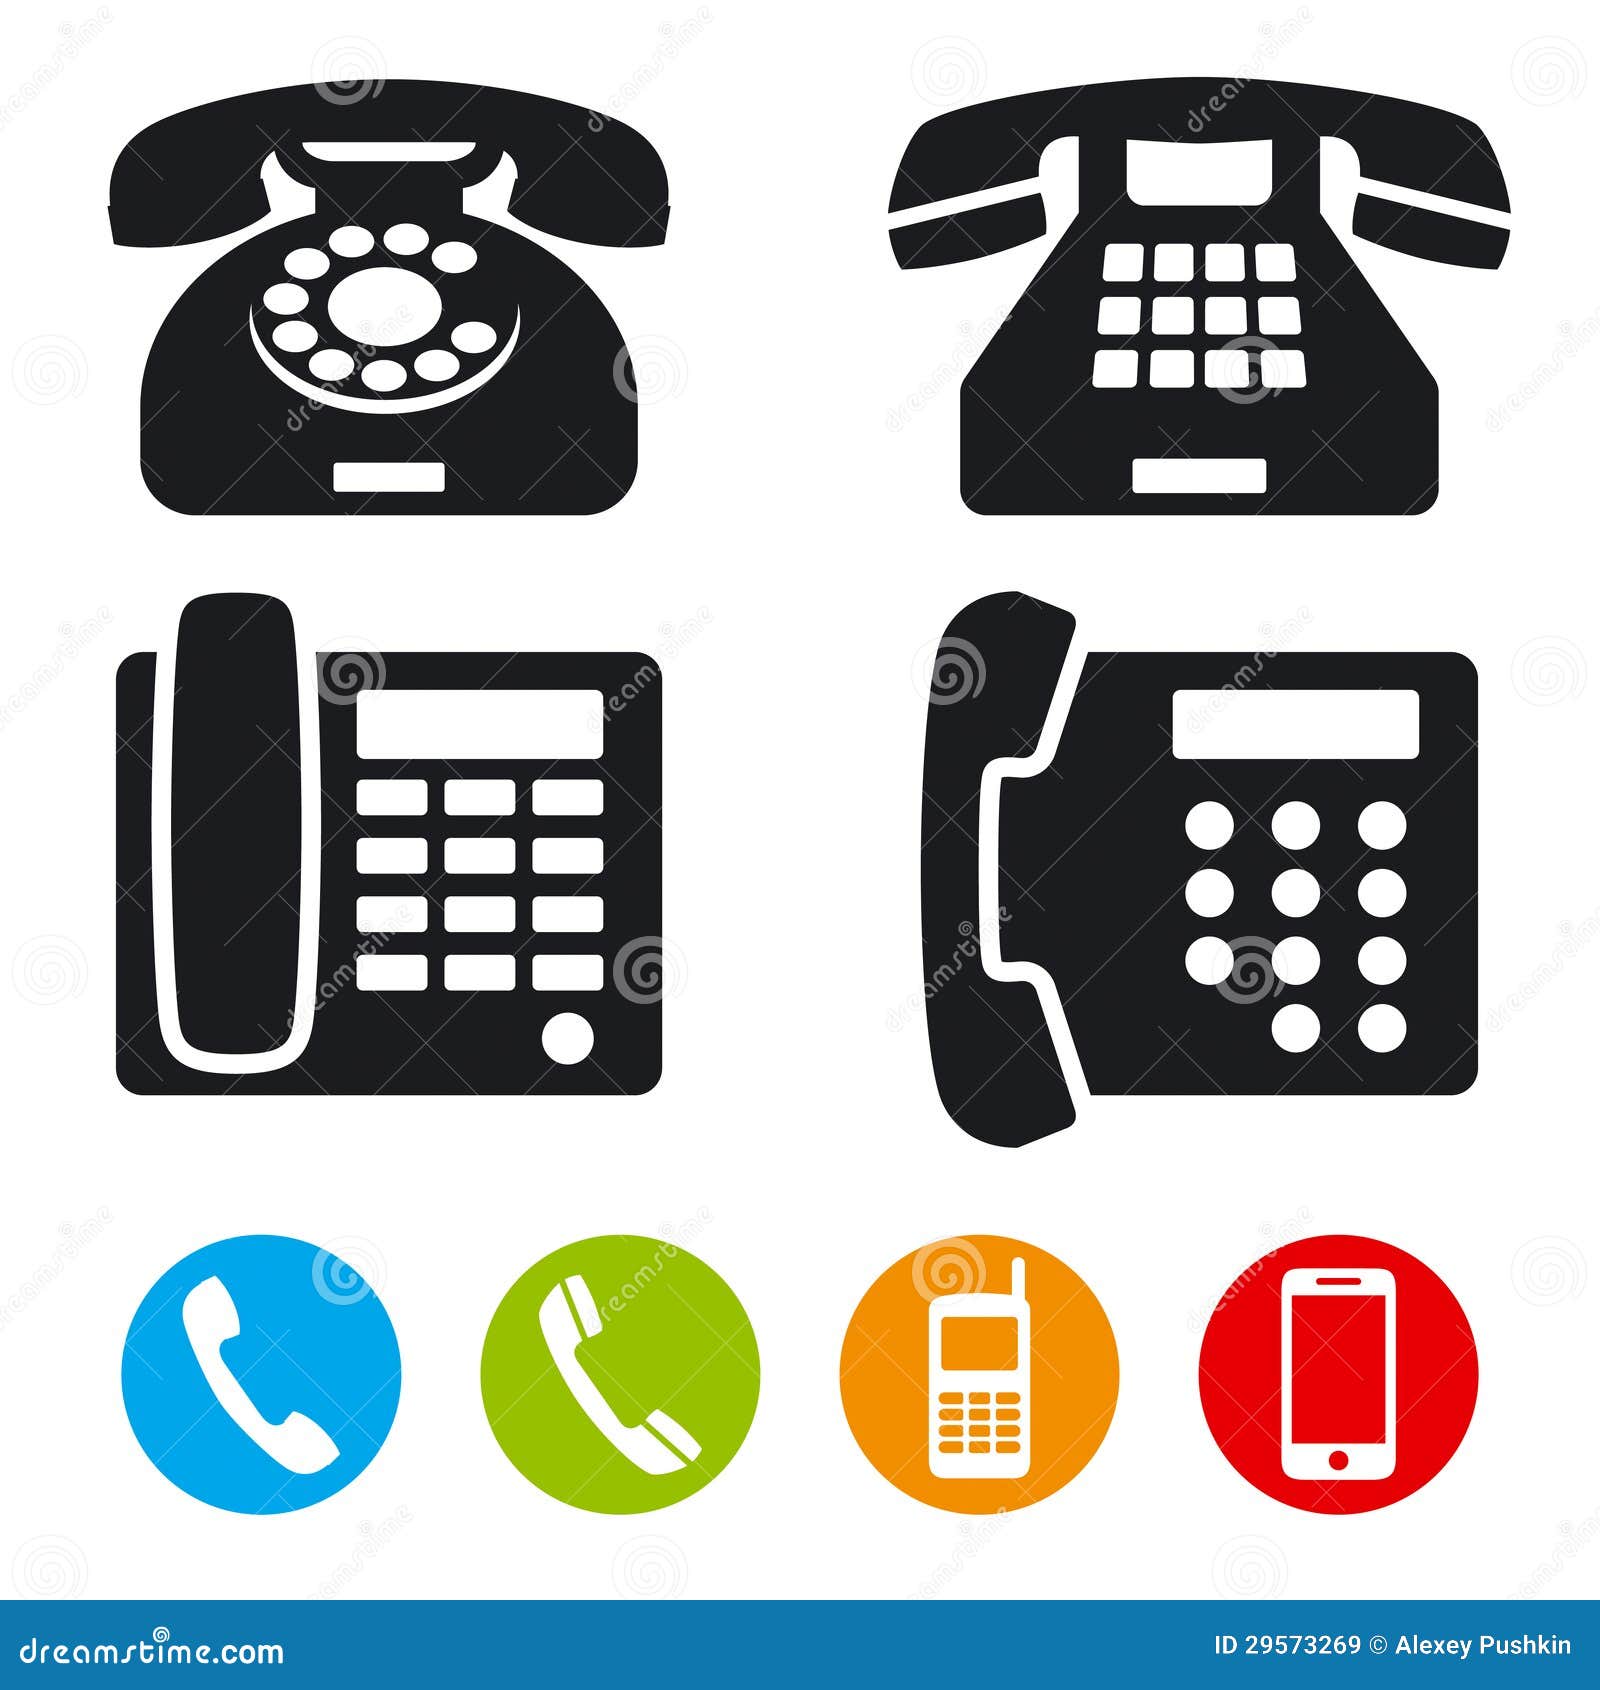 vector free download telephone - photo #40